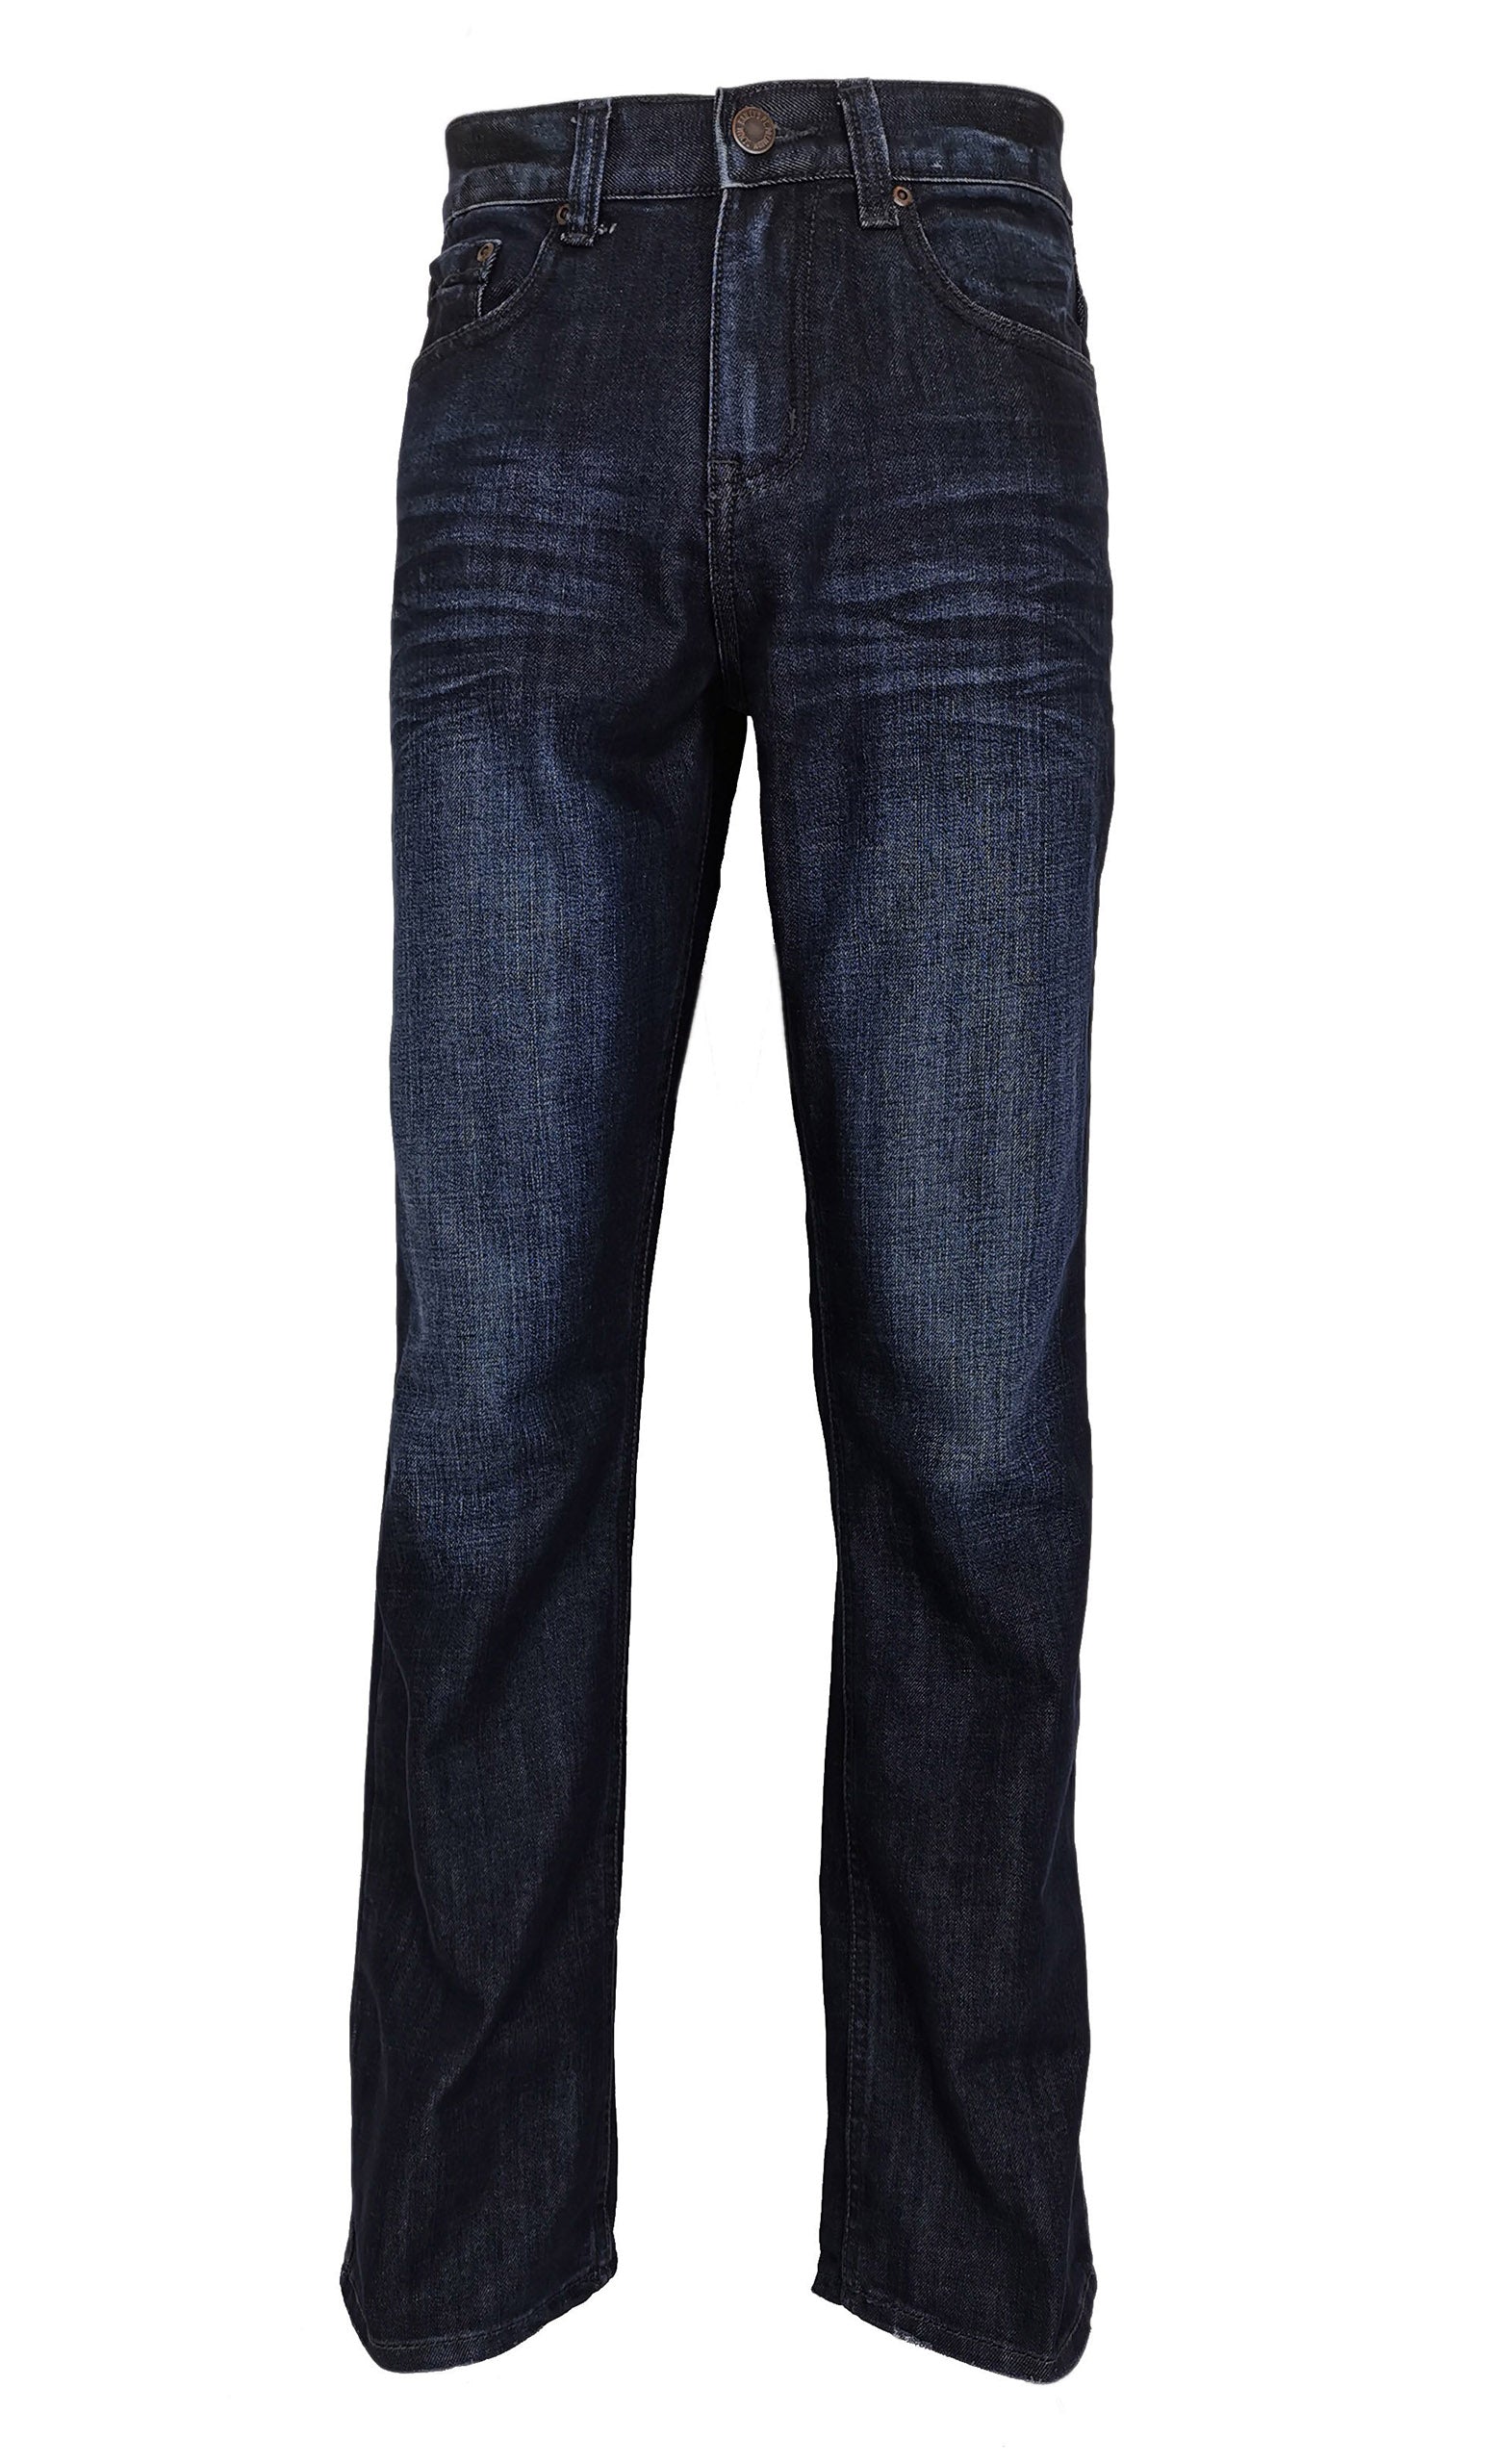 Bailey's Point Men's Fashion Relaxed Bootcut Jeans Regular Fit: Classi